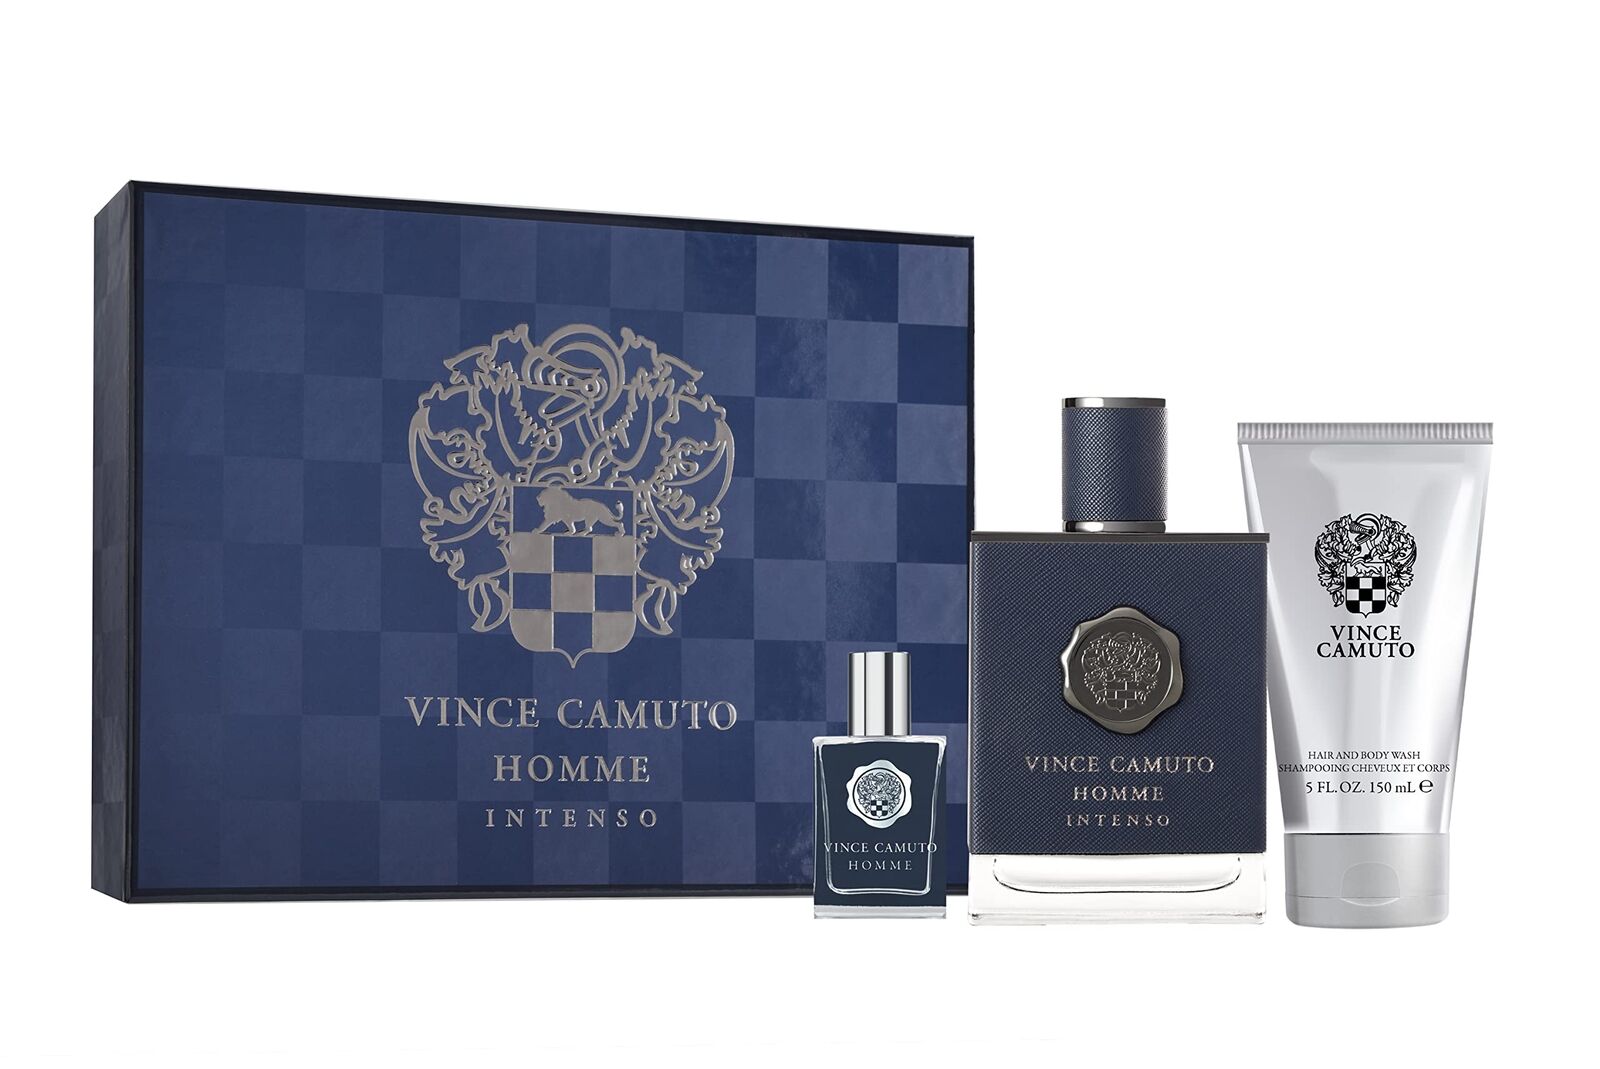 Vince Camuto Terra by Vince Camuto 3.4 oz EDT Cologne for Men New